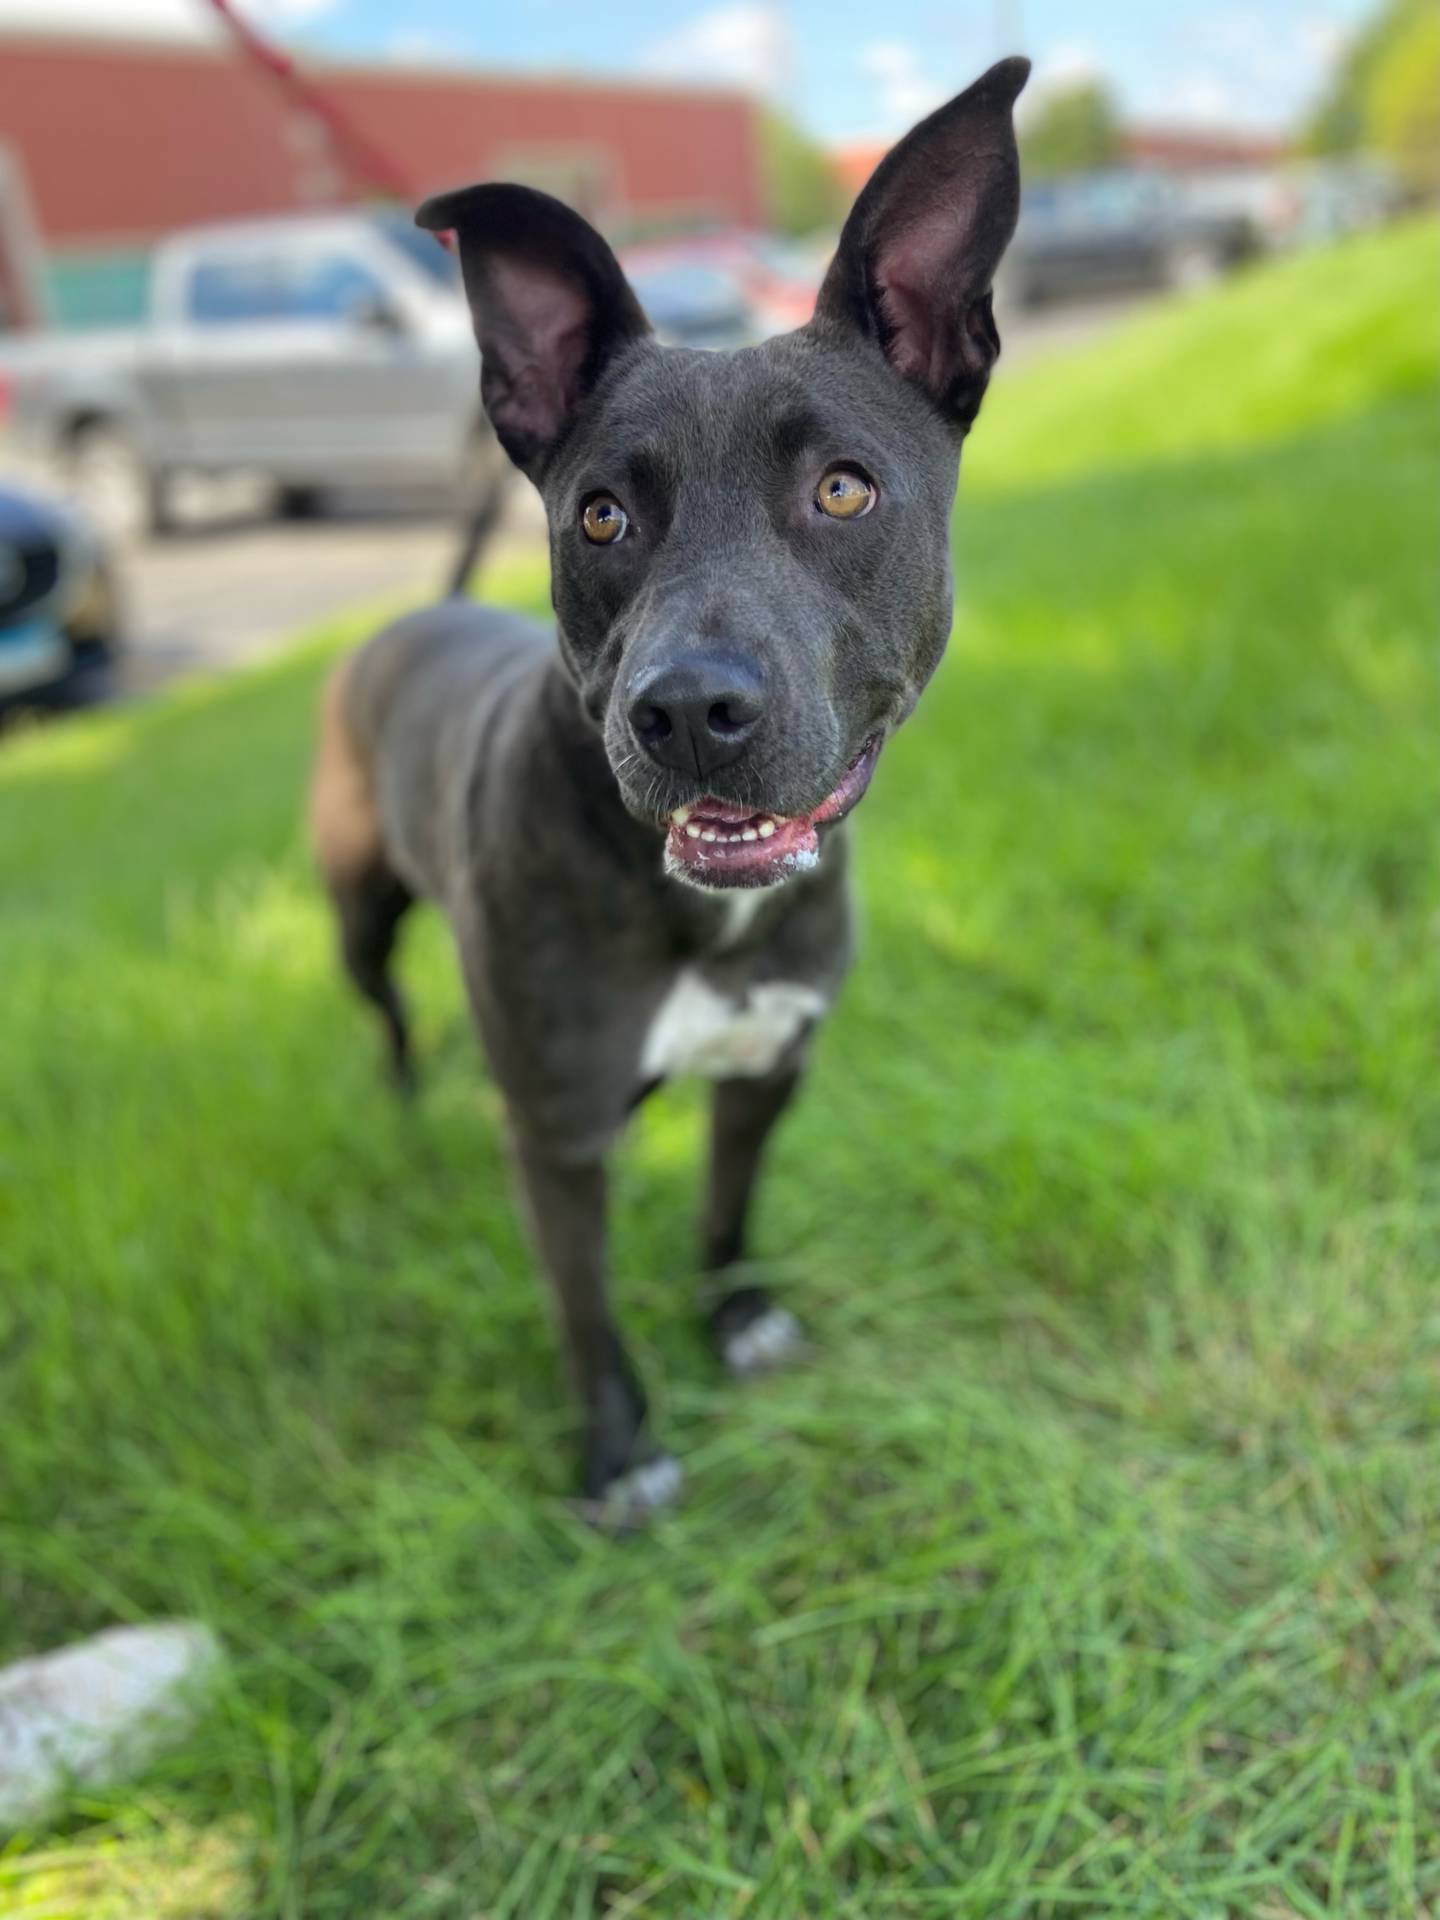 Bella is a 2-year-old terrier that was relinquished when her owners could no longer care for her. She is smart, house-trained, and knows some basic commands. She is playful and loves other dogs. To meet Bella, email Victoria at victoria@nawsus.org. Visit nawsus.org.